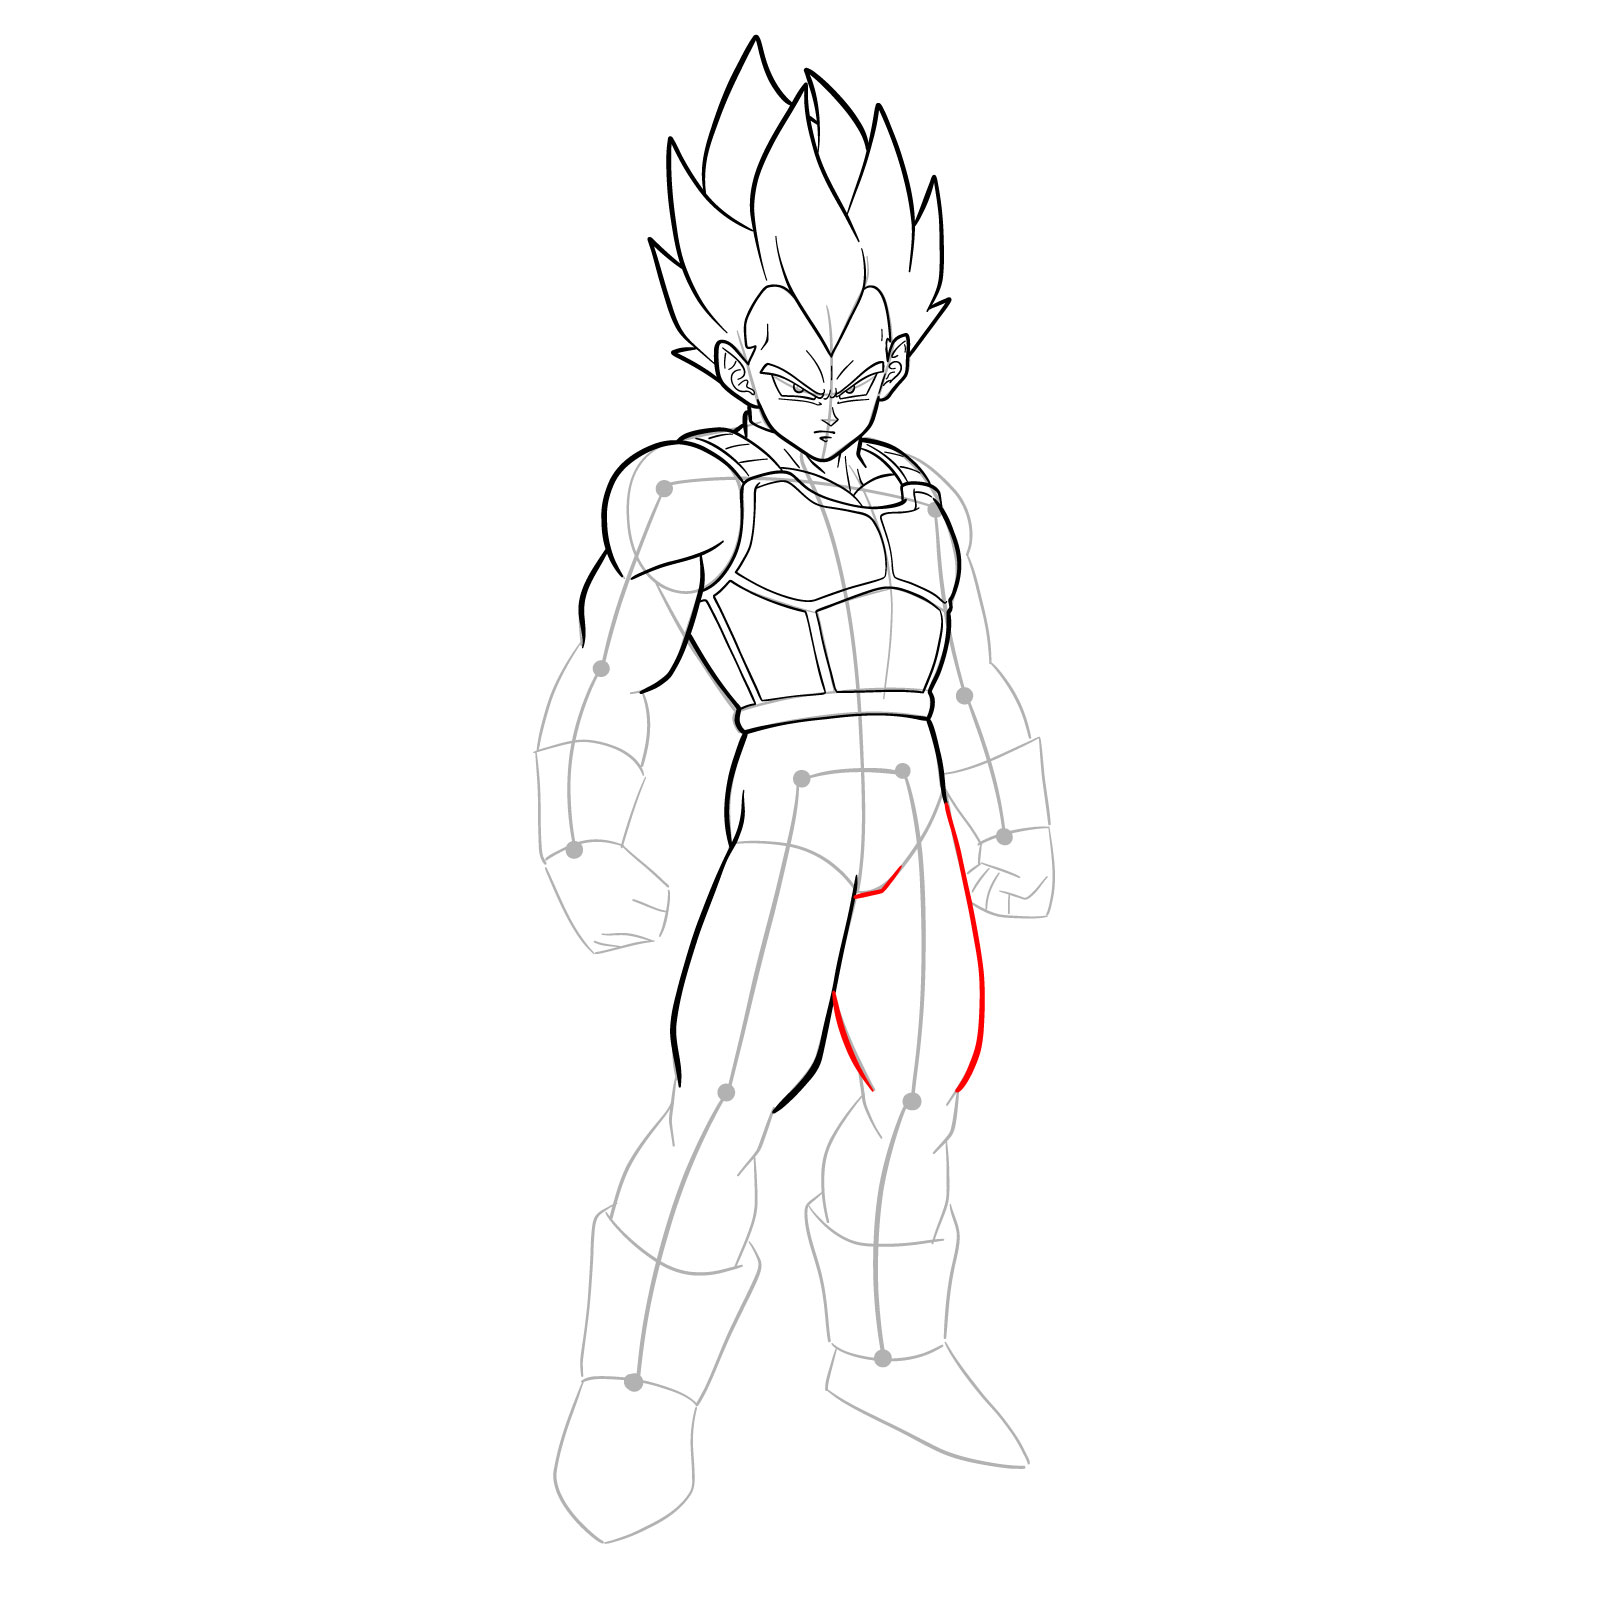 How to draw Vegeta in SSGSS - step 26